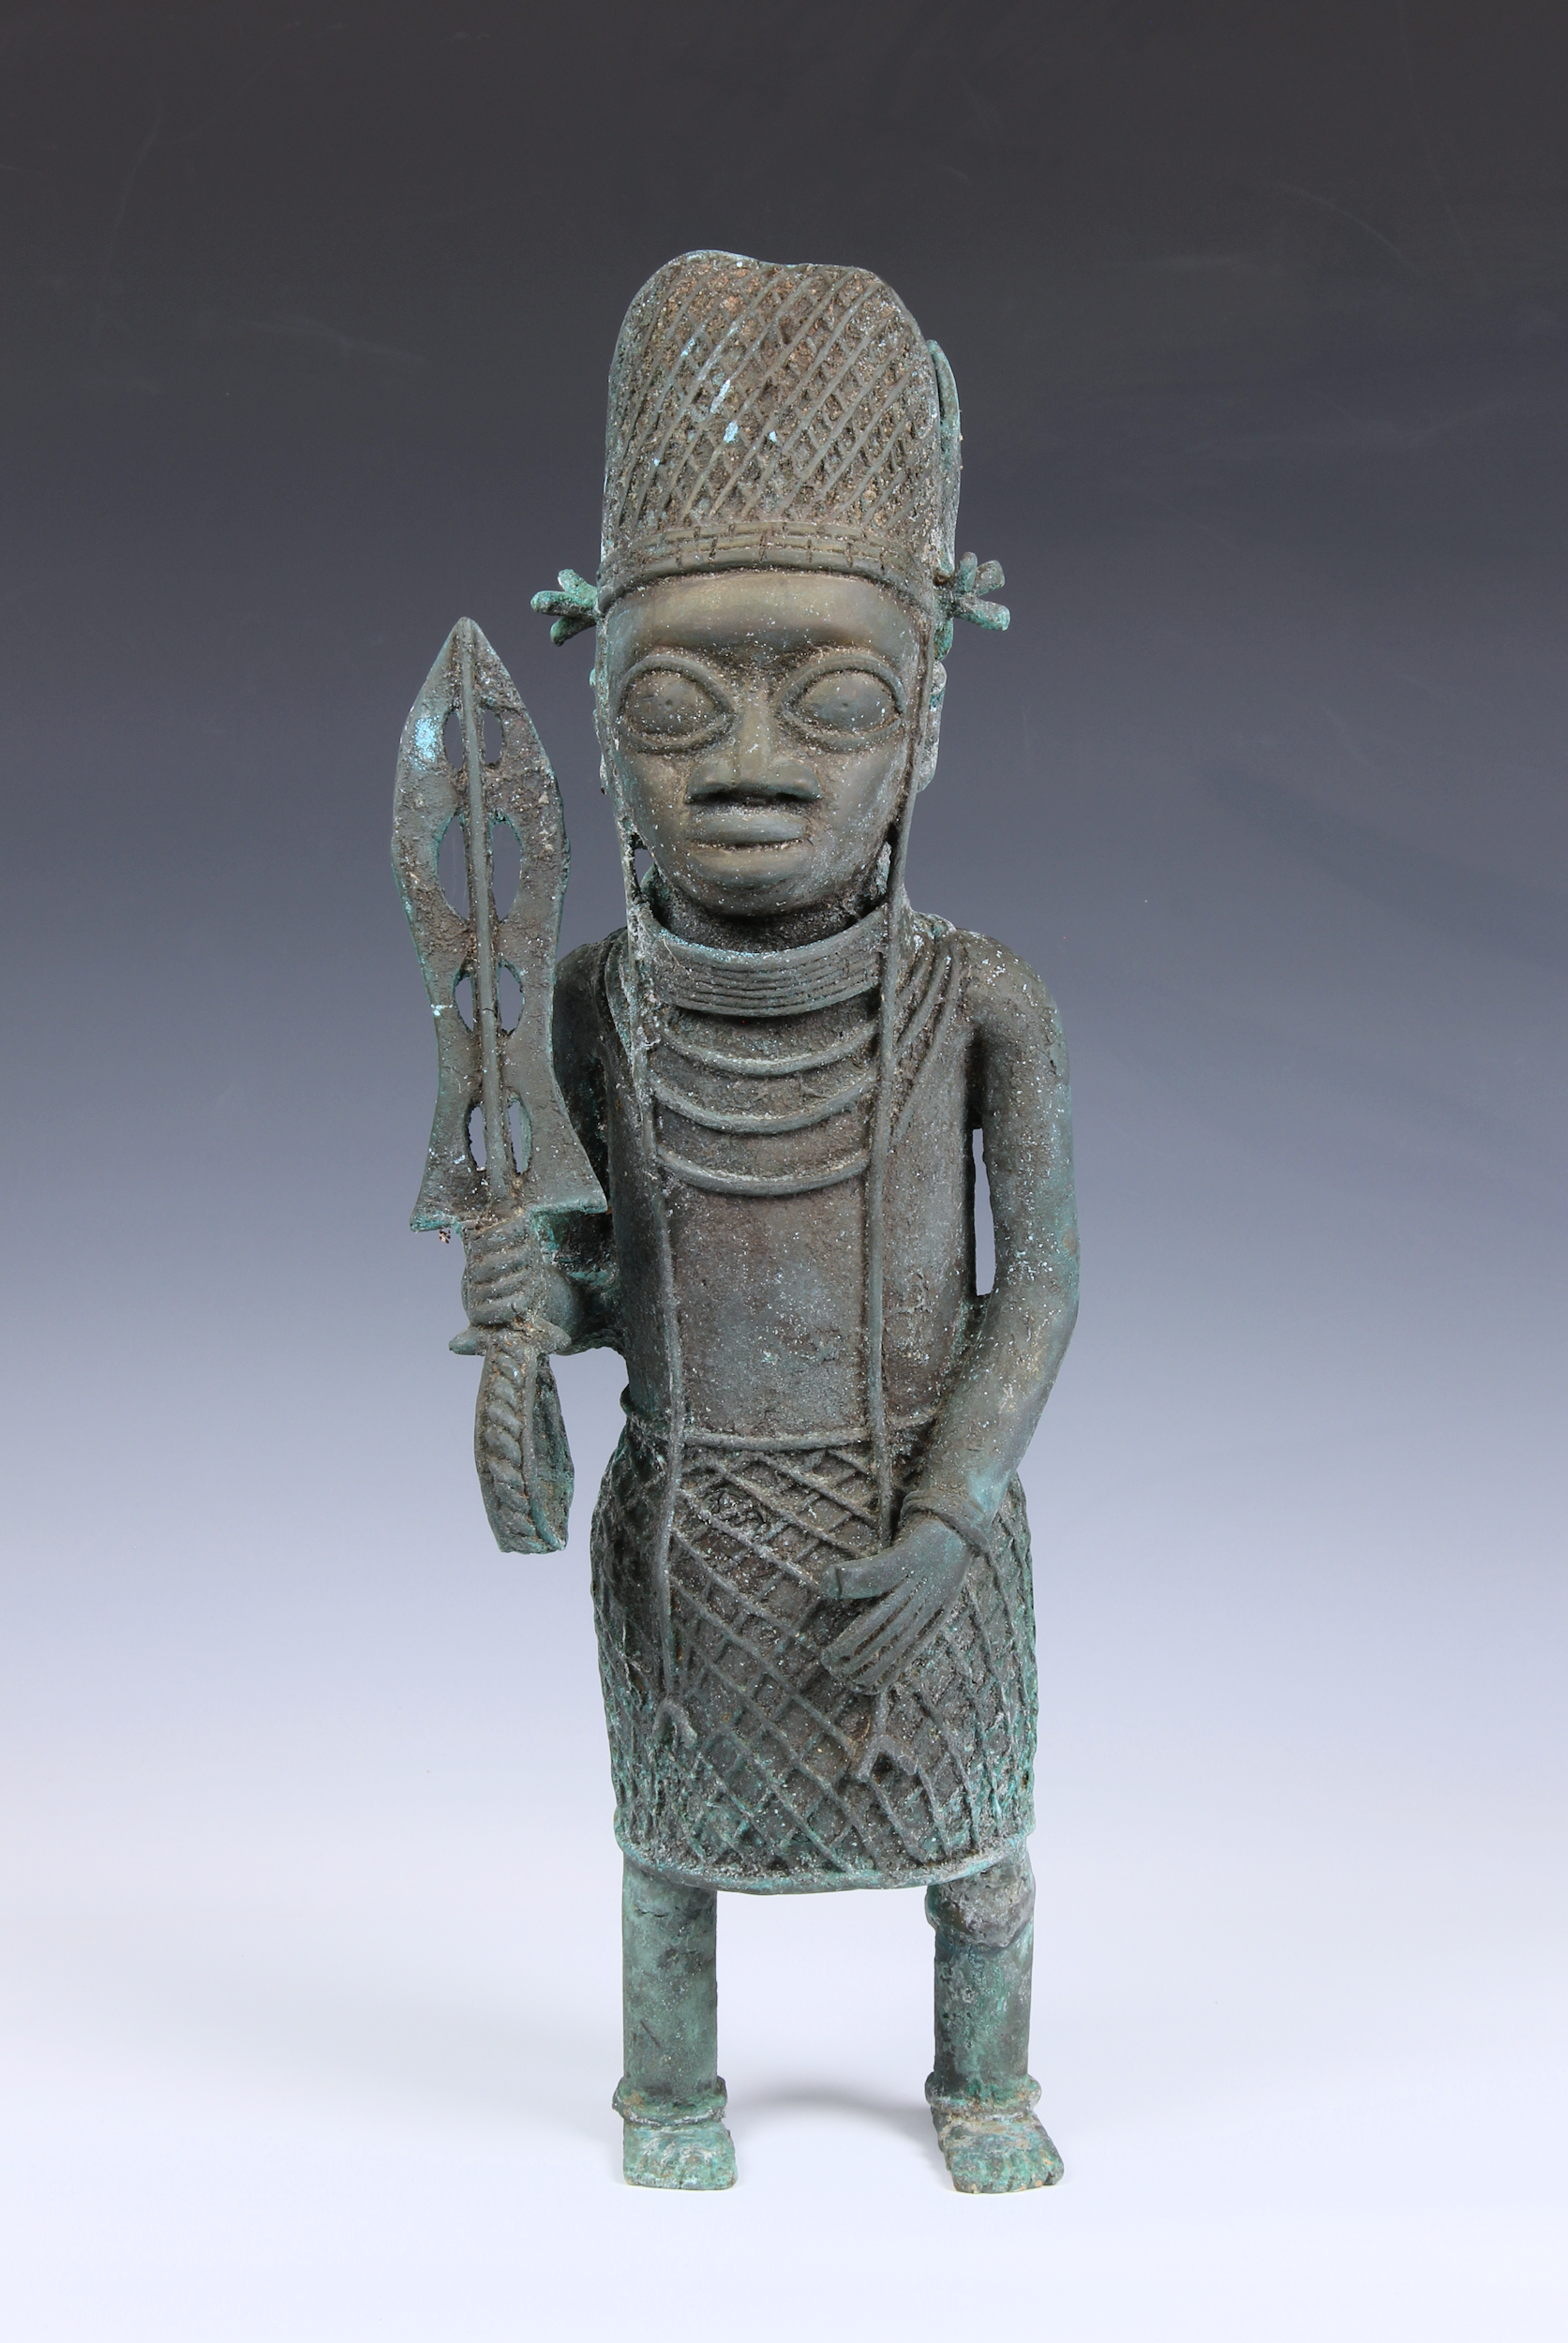 A large Benin style Nigerian bronze figure of an warrior 20th century, standing holding a sword with